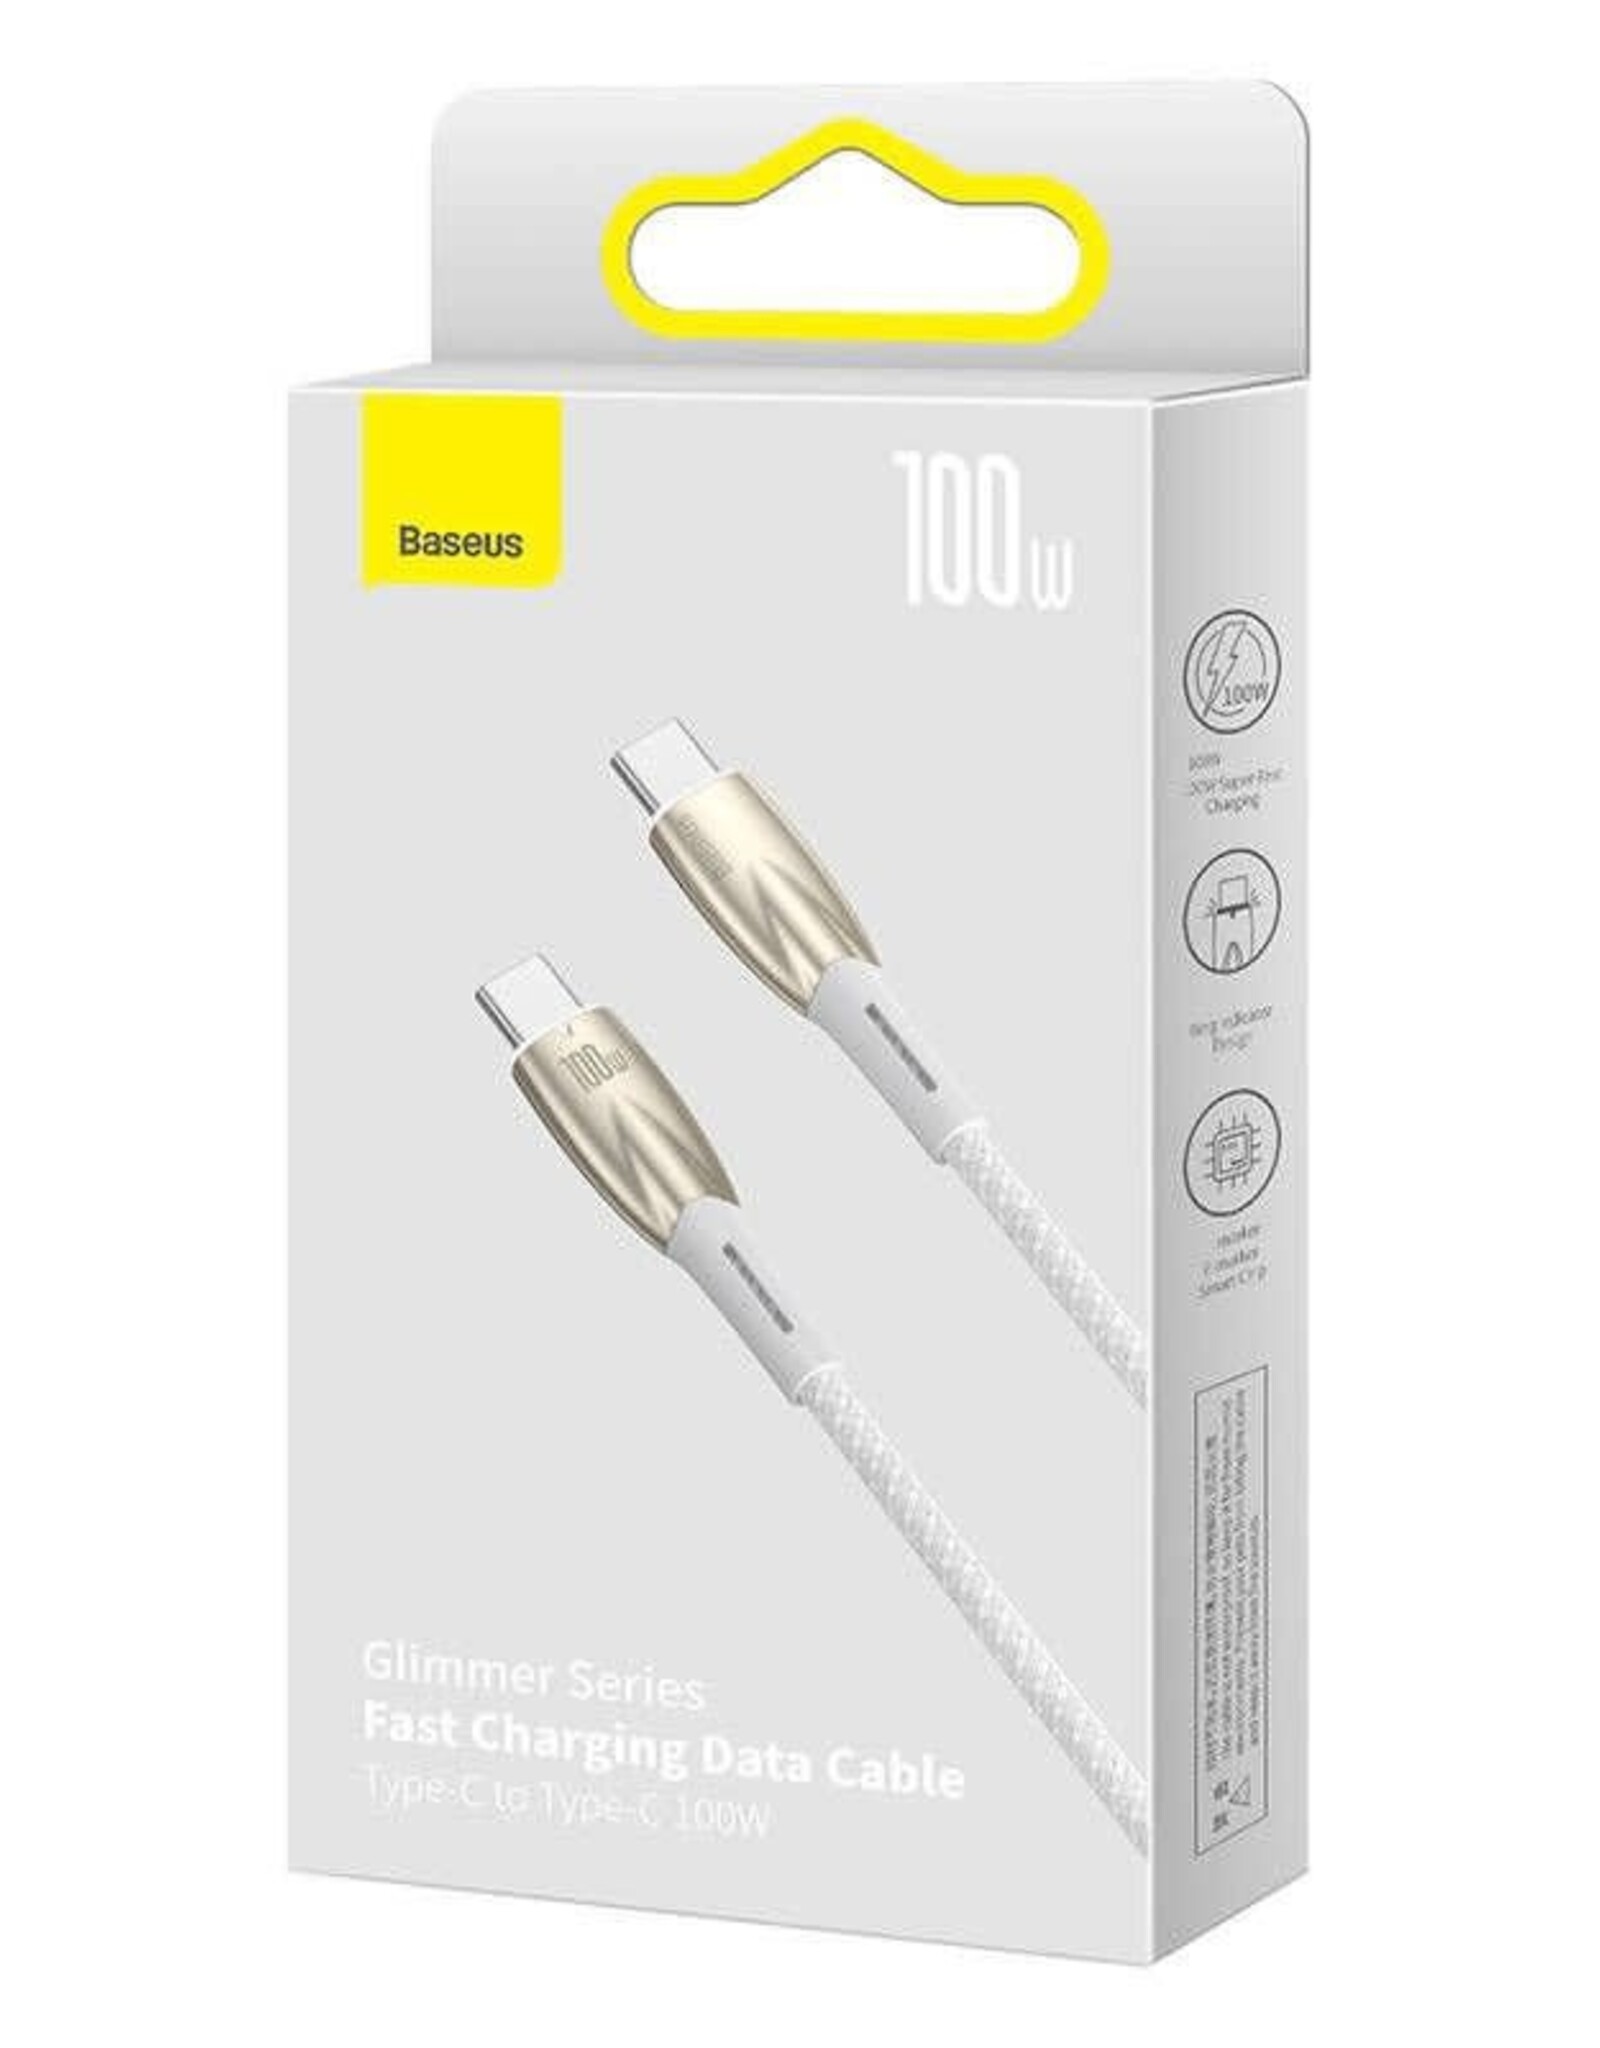 Baseus 100w Glimmer Series Fast Charging data cable gold type c to type c 2m